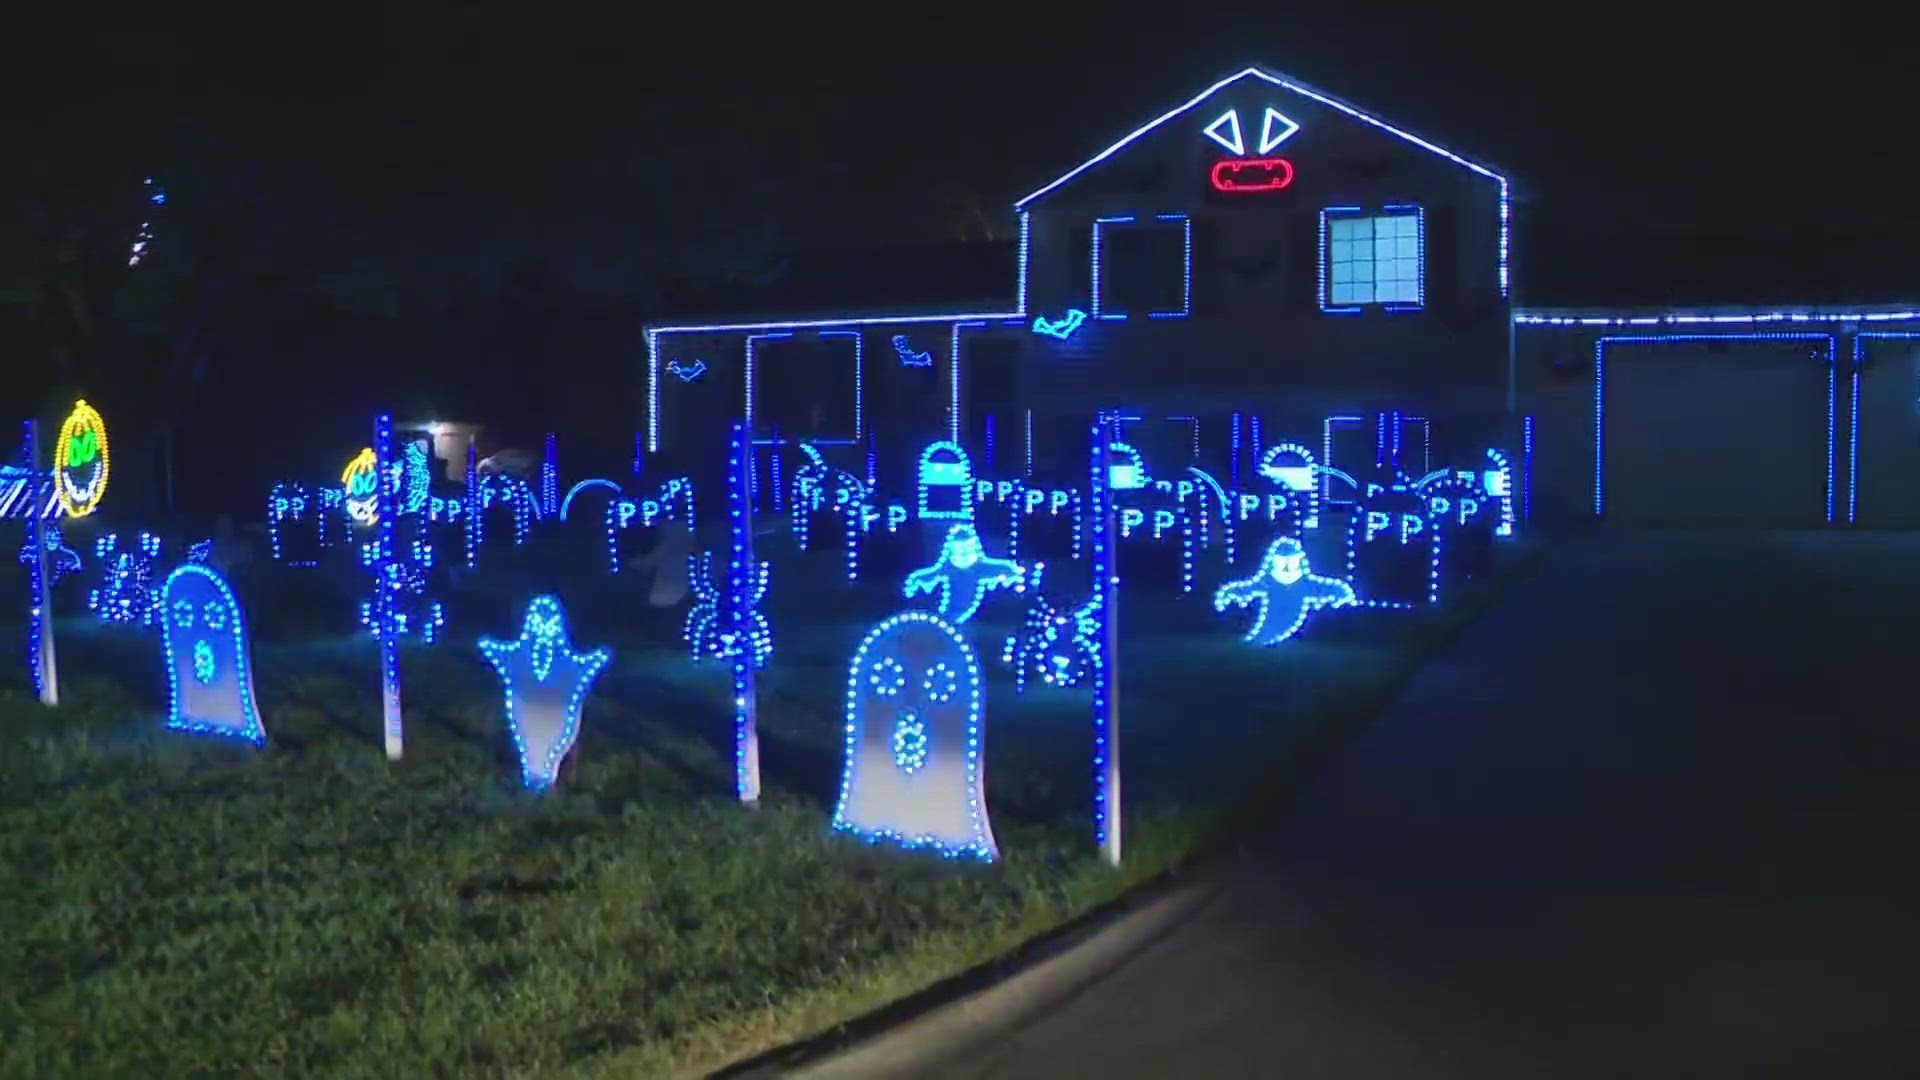 This is so cool! Check out this awesome Halloween display at 4781 Wildflower Drive in Green.